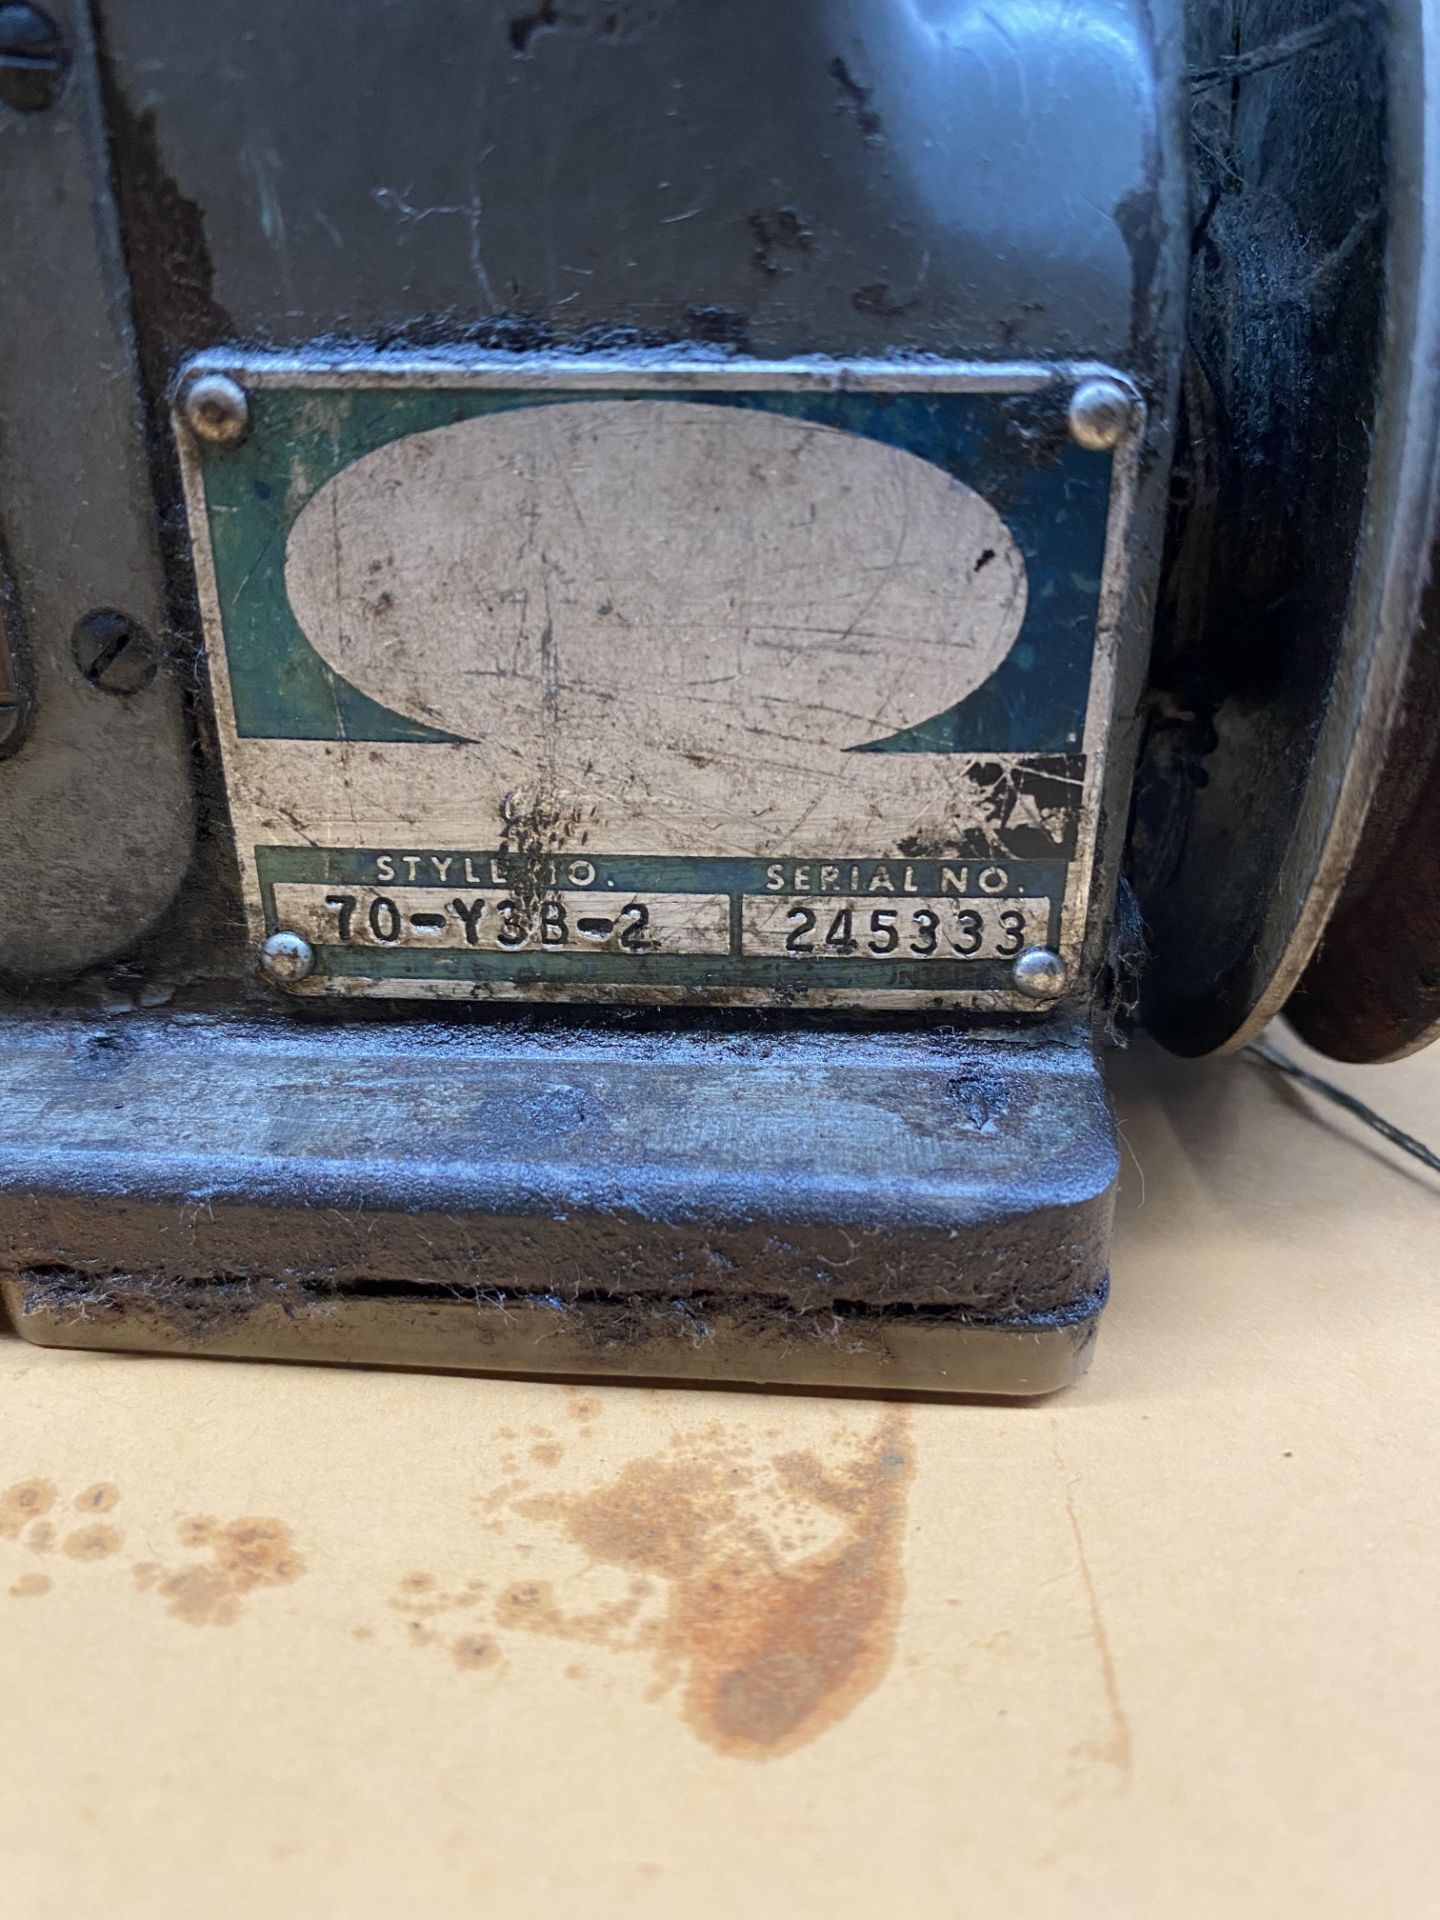 Merrow Sewing Machine, Model 70-Y3B-2 RIGGING FEE $15 - Packaging not included. - Image 4 of 4